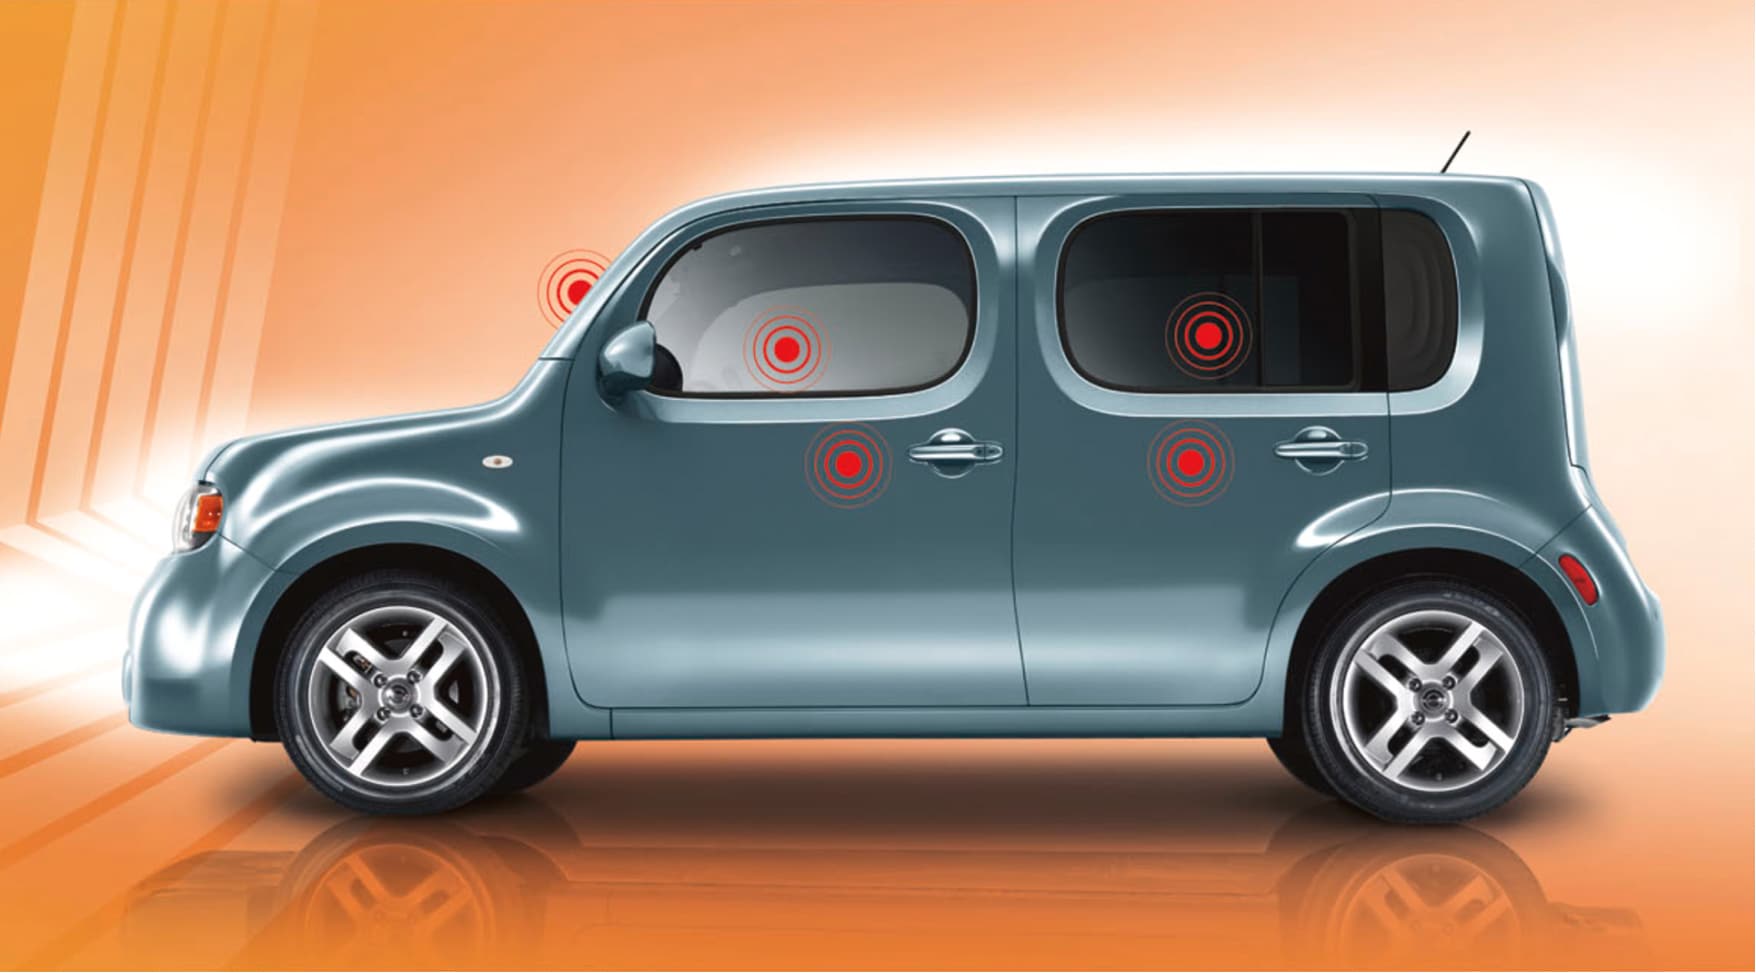 Nissan Cube on orange background with red dots to demonstrate safety features